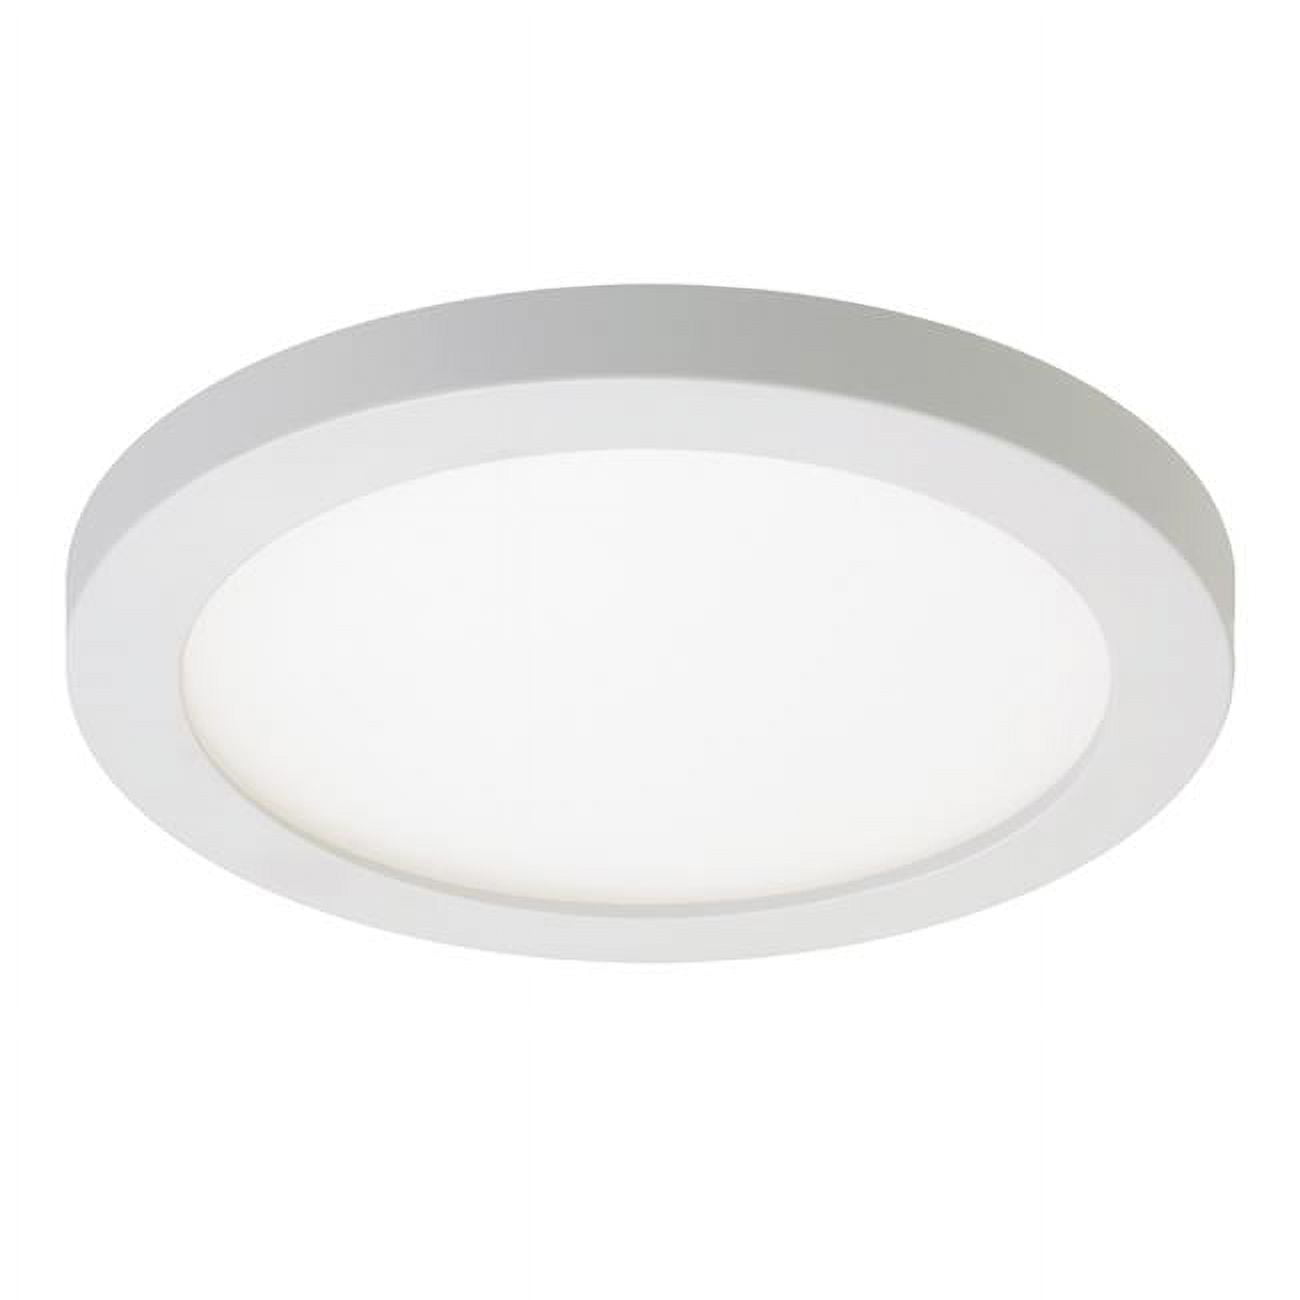 UPC 080083020904 product image for 3008784 4 in. 9.7W SMD4 Series LED Recessed Surface Mount Light Trim - Soft Whit | upcitemdb.com